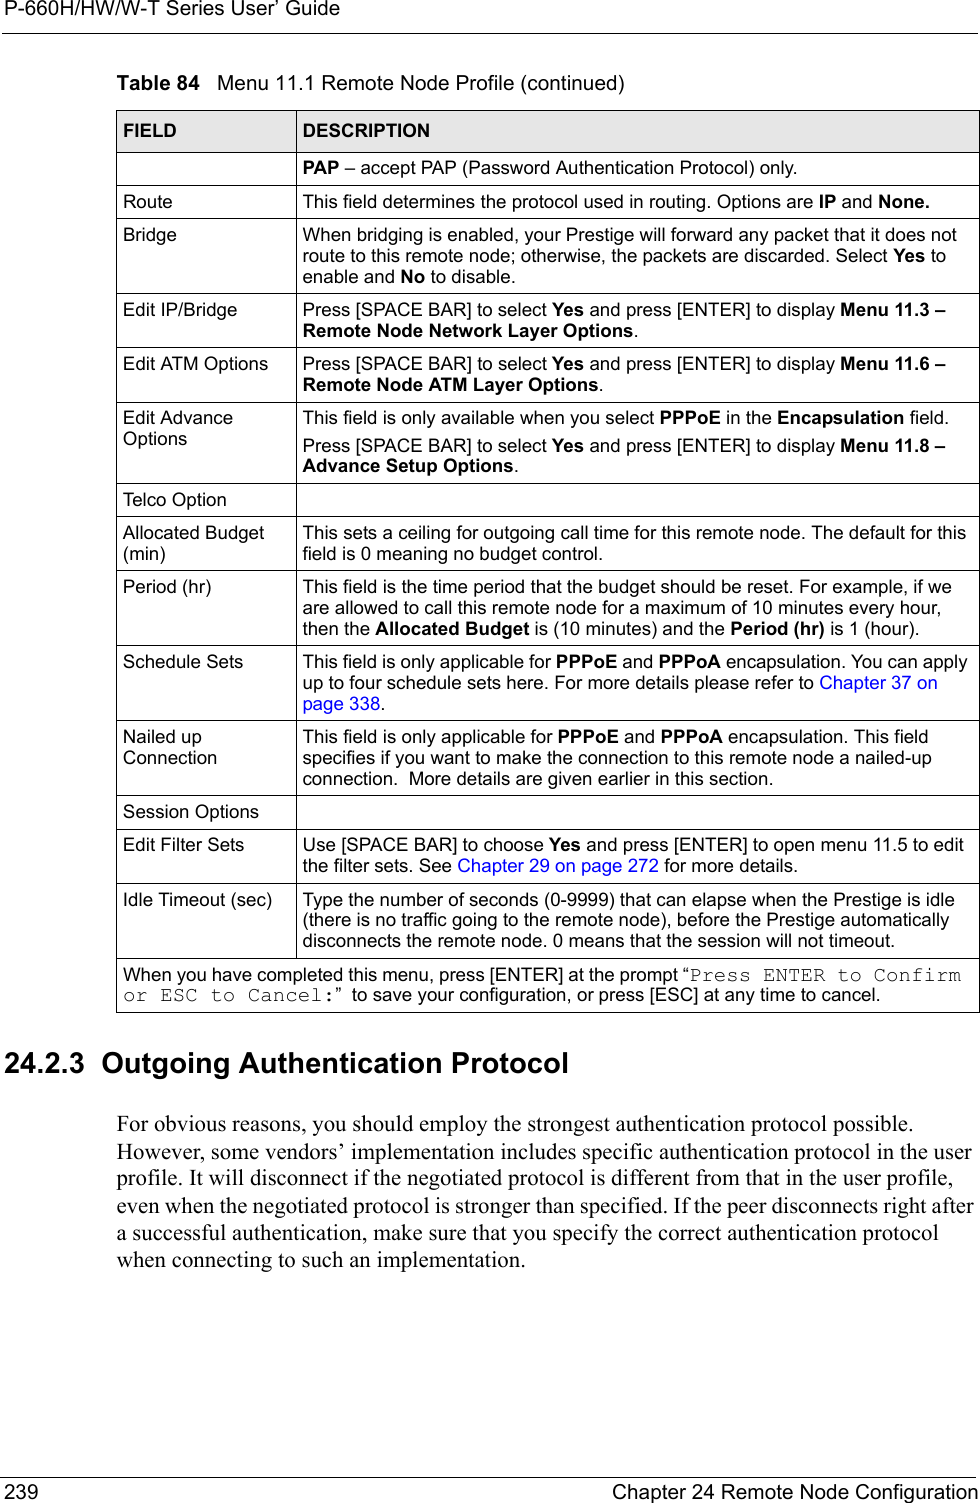 P-660H/HW/W-T Series User’ Guide239 Chapter 24 Remote Node Configuration24.2.3  Outgoing Authentication ProtocolFor obvious reasons, you should employ the strongest authentication protocol possible. However, some vendors’ implementation includes specific authentication protocol in the user profile. It will disconnect if the negotiated protocol is different from that in the user profile, even when the negotiated protocol is stronger than specified. If the peer disconnects right after a successful authentication, make sure that you specify the correct authentication protocol when connecting to such an implementation.PAP – accept PAP (Password Authentication Protocol) only.Route This field determines the protocol used in routing. Options are IP and None.Bridge When bridging is enabled, your Prestige will forward any packet that it does not route to this remote node; otherwise, the packets are discarded. Select Yes to enable and No to disable.Edit IP/Bridge Press [SPACE BAR] to select Yes and press [ENTER] to display Menu 11.3 – Remote Node Network Layer Options.Edit ATM Options Press [SPACE BAR] to select Yes and press [ENTER] to display Menu 11.6 – Remote Node ATM Layer Options.Edit Advance OptionsThis field is only available when you select PPPoE in the Encapsulation field.Press [SPACE BAR] to select Yes and press [ENTER] to display Menu 11.8 – Advance Setup Options. Telco OptionAllocated Budget (min)This sets a ceiling for outgoing call time for this remote node. The default for this field is 0 meaning no budget control. Period (hr) This field is the time period that the budget should be reset. For example, if we are allowed to call this remote node for a maximum of 10 minutes every hour, then the Allocated Budget is (10 minutes) and the Period (hr) is 1 (hour).Schedule Sets This field is only applicable for PPPoE and PPPoA encapsulation. You can apply up to four schedule sets here. For more details please refer to Chapter 37 on page 338.Nailed up ConnectionThis field is only applicable for PPPoE and PPPoA encapsulation. This field specifies if you want to make the connection to this remote node a nailed-up connection.  More details are given earlier in this section.Session OptionsEdit Filter Sets Use [SPACE BAR] to choose Yes and press [ENTER] to open menu 11.5 to edit the filter sets. See Chapter 29 on page 272 for more details.Idle Timeout (sec) Type the number of seconds (0-9999) that can elapse when the Prestige is idle (there is no traffic going to the remote node), before the Prestige automatically disconnects the remote node. 0 means that the session will not timeout.When you have completed this menu, press [ENTER] at the prompt “Press ENTER to Confirm or ESC to Cancel:”  to save your configuration, or press [ESC] at any time to cancel.Table 84   Menu 11.1 Remote Node Profile (continued)FIELD DESCRIPTION